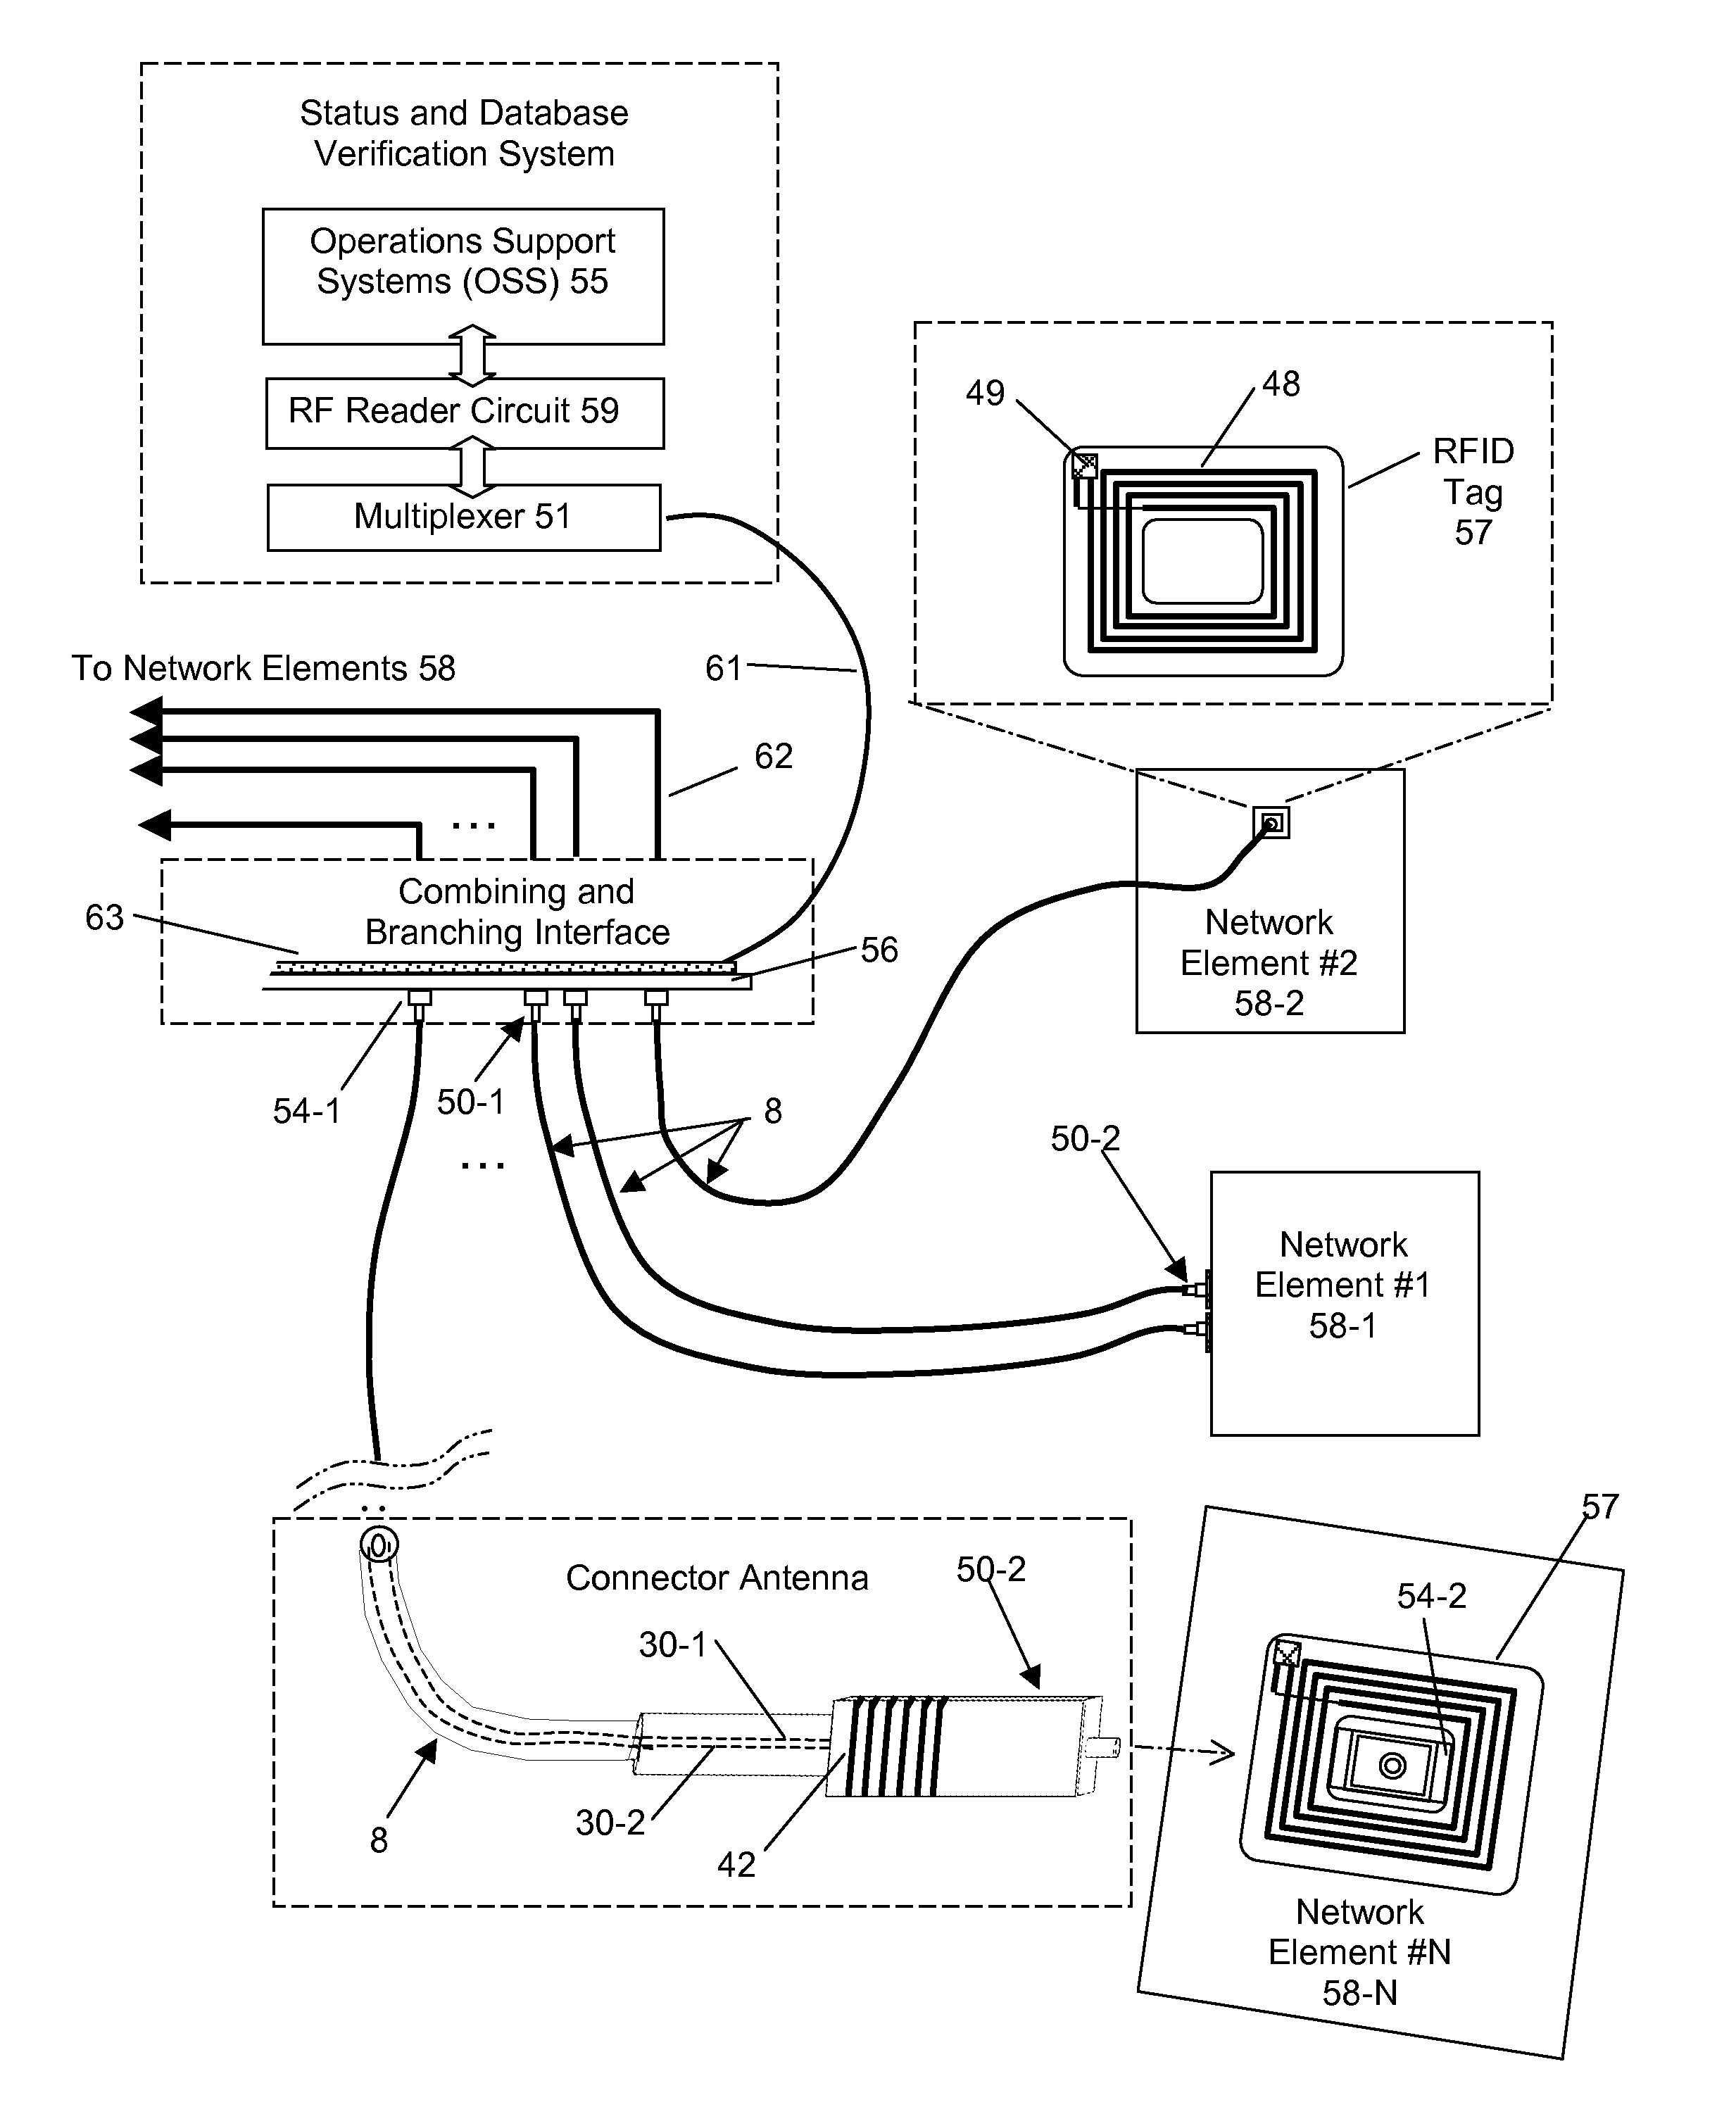 Electrically traceable and identifiable fiber optic cables and connectors